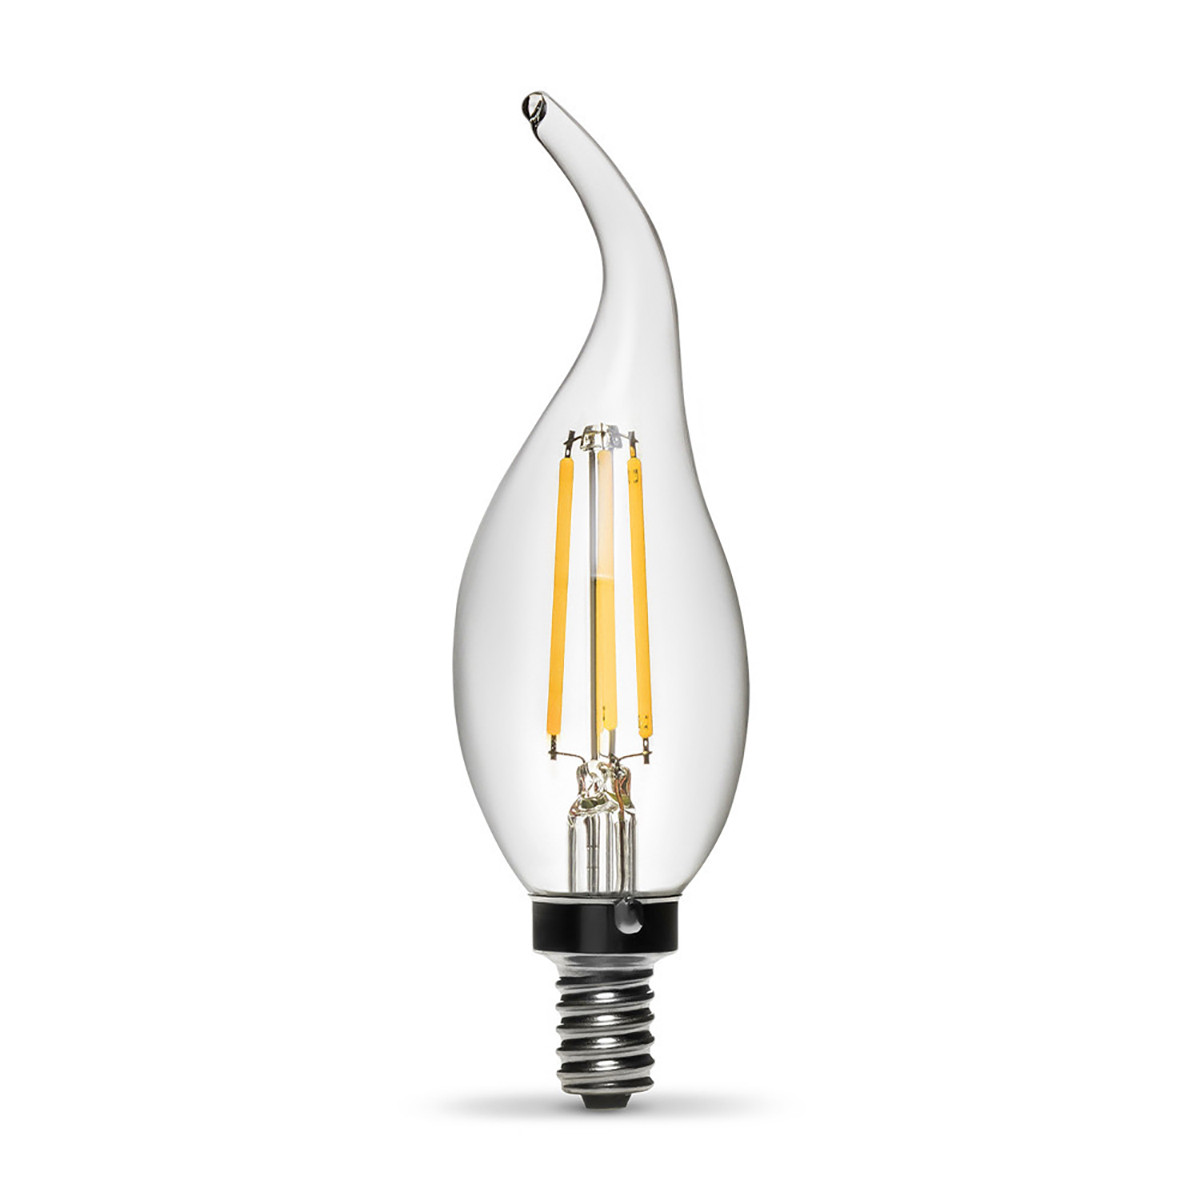 4W Filament LED Candle Light Bulb Light C35 Flame Tip Chandelier Bulb with E14 Base 40W Equivalent Halogen Replacement